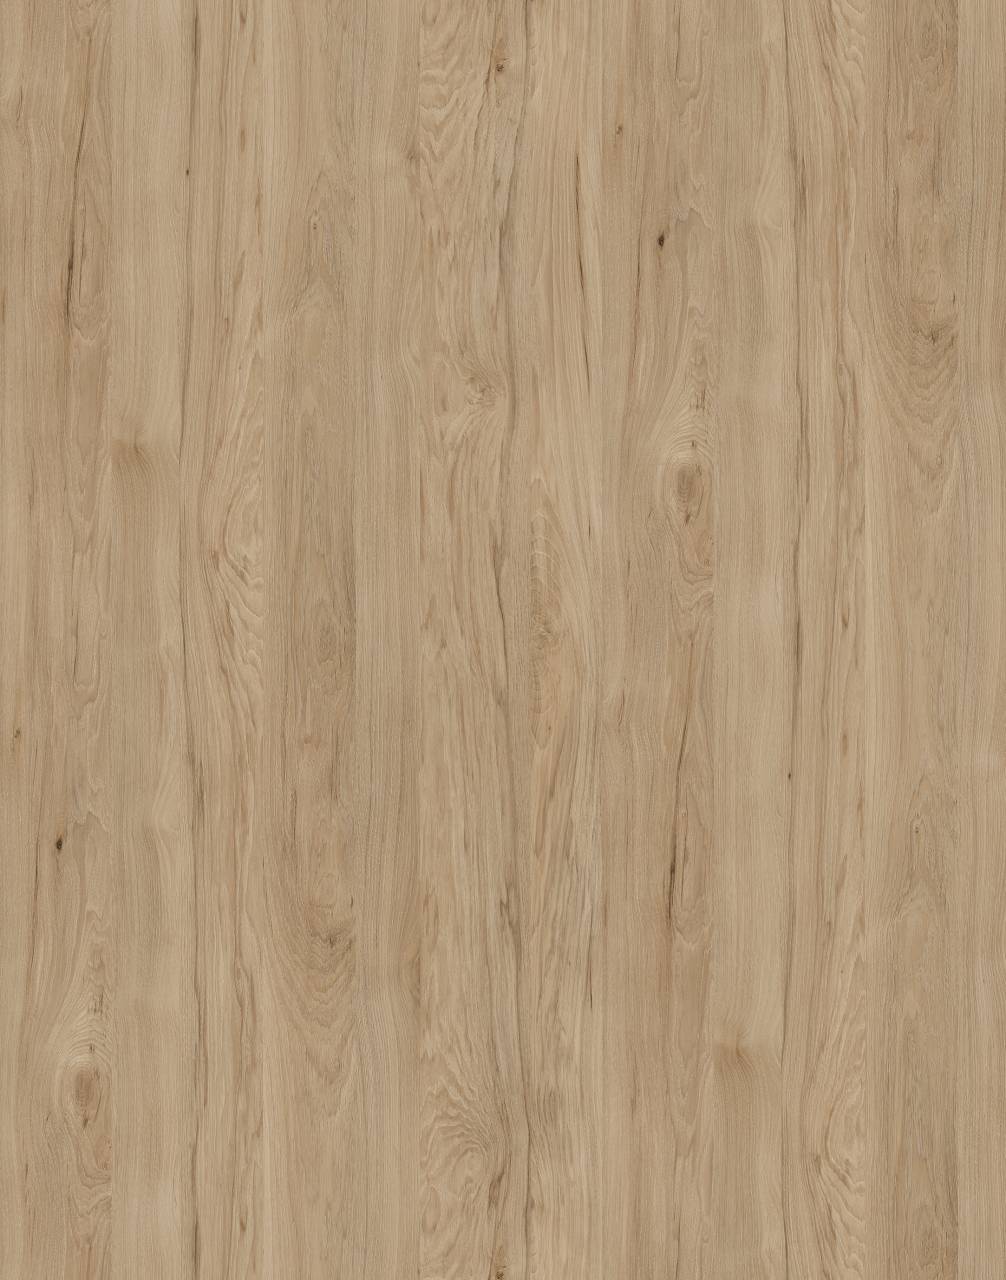 Natural Rockford Hickory PW HPL with textured surface and warm brown tones for a timeless and versatile look.